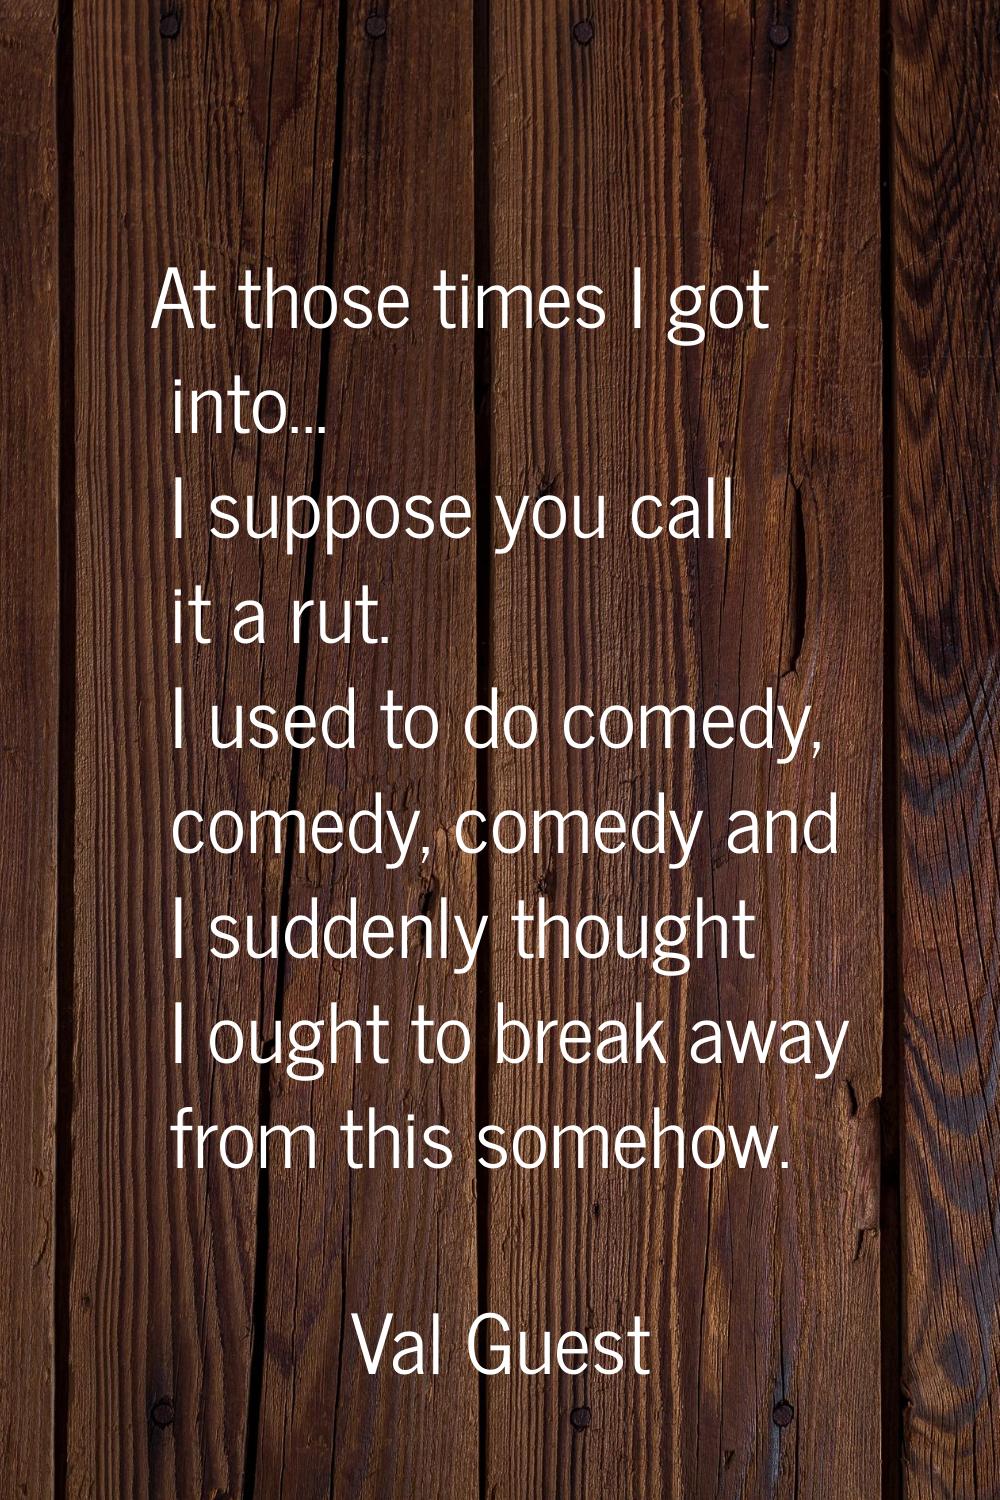 At those times I got into... I suppose you call it a rut. I used to do comedy, comedy, comedy and I